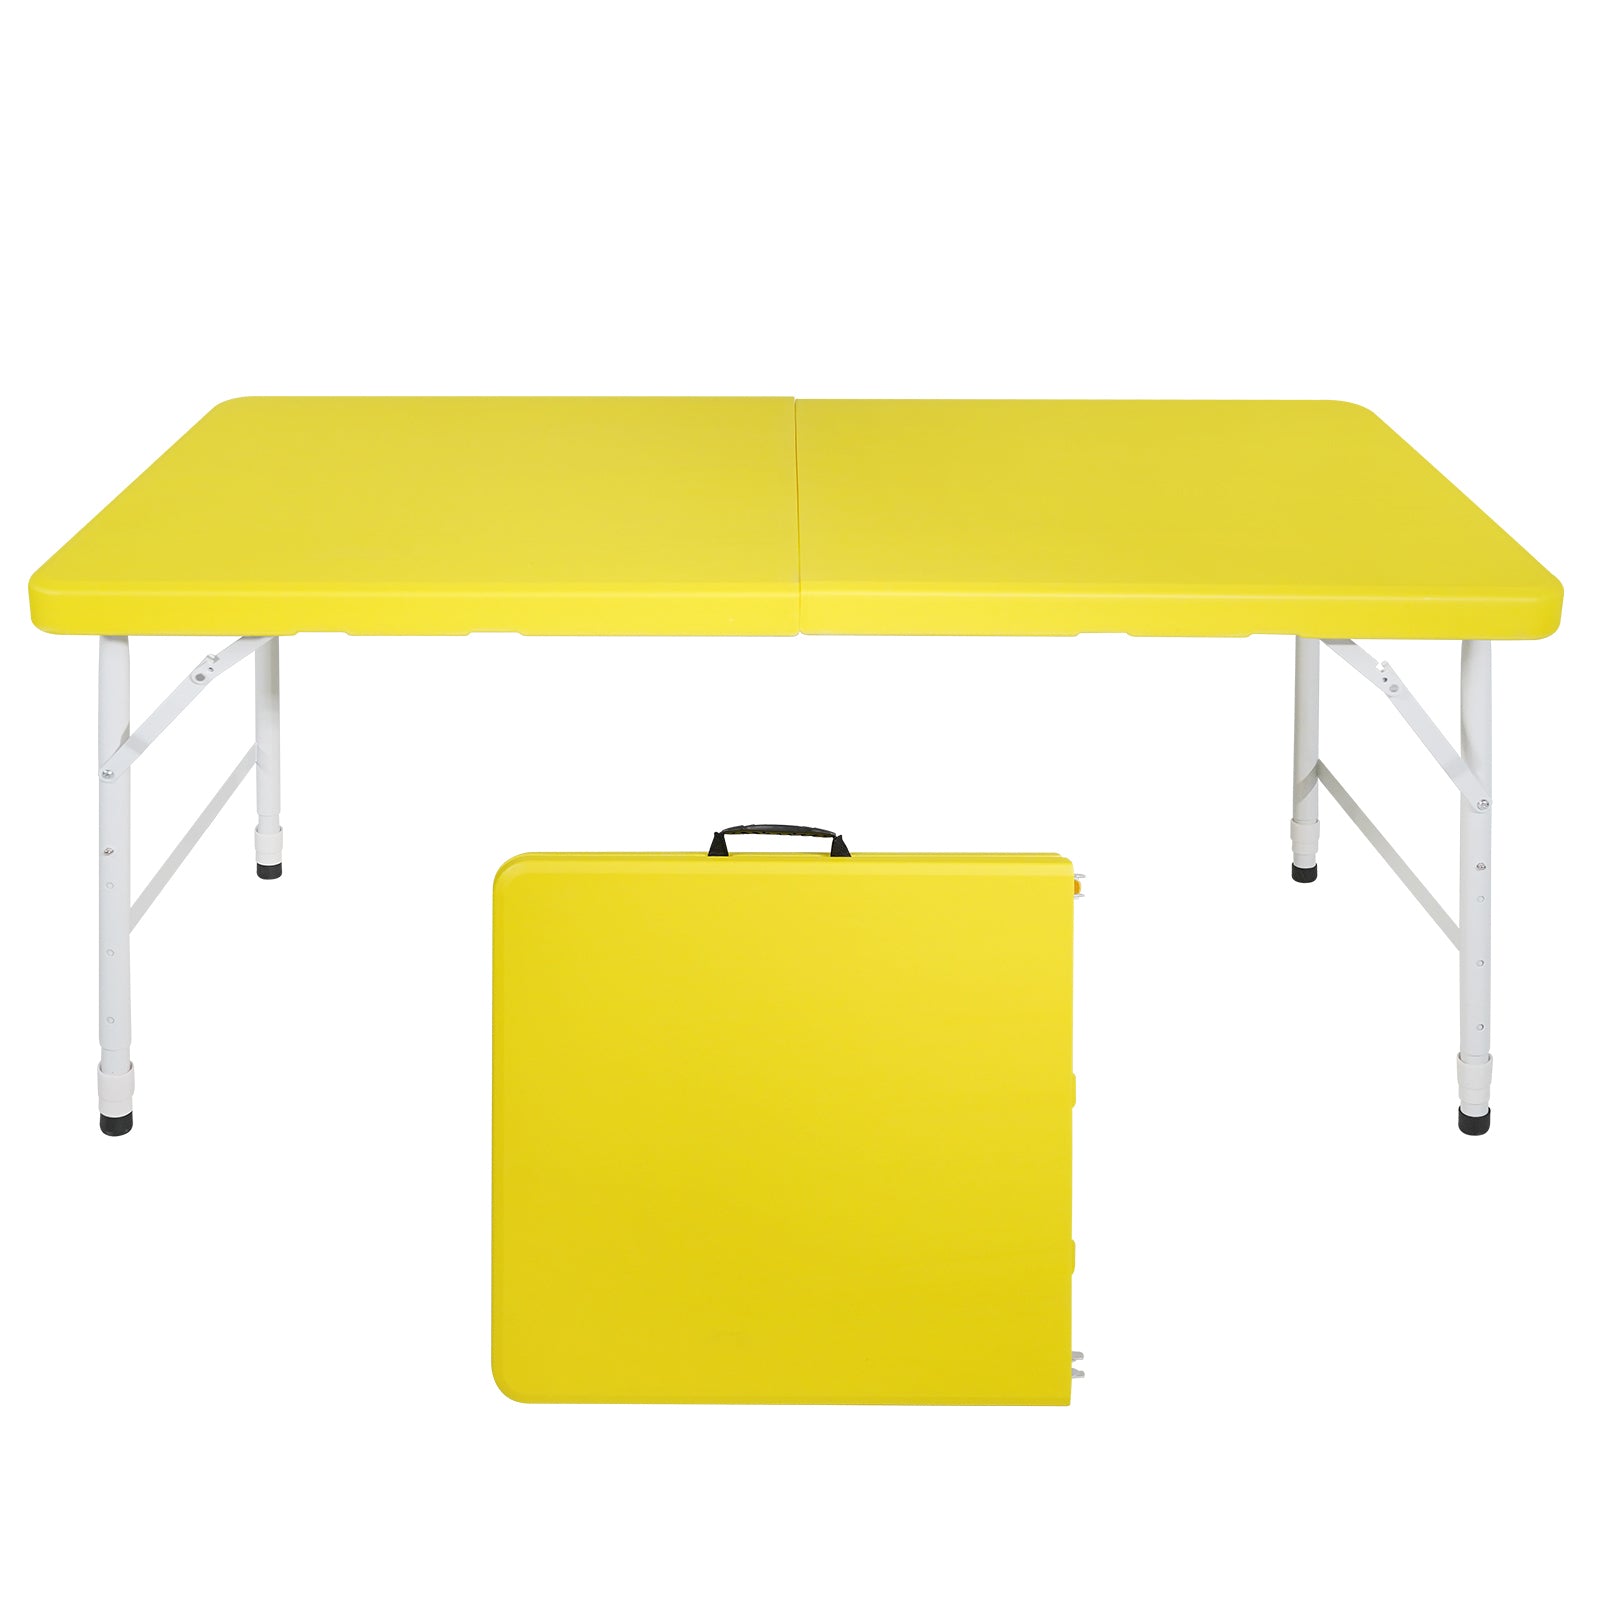 🆓🚛 4Ft Yellow Portable Folding Table Indoor & Outdoor Maximum Weight 135Kg Foldable Table for Camping